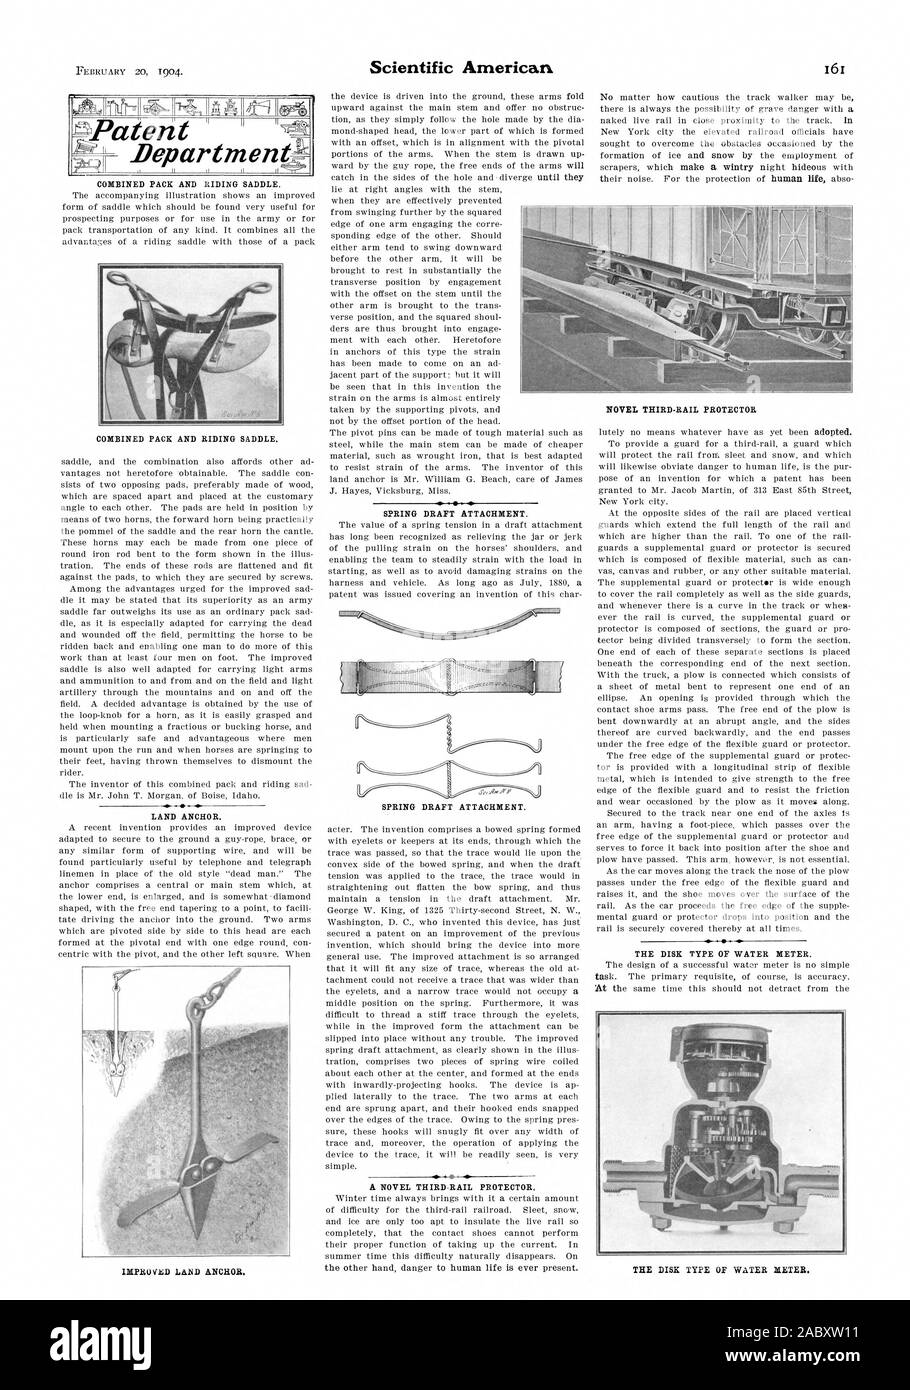 LAND ANCHOR. SPRING DRAFT ATTACHMENT. A NOVEL THIRD-RAIL PROTECTOR. THE DISK TYPE OF WATER METER. THE DISK TYPE OF WATER DIETER. Patent, scientific american, 1904-02-20 Stock Photo